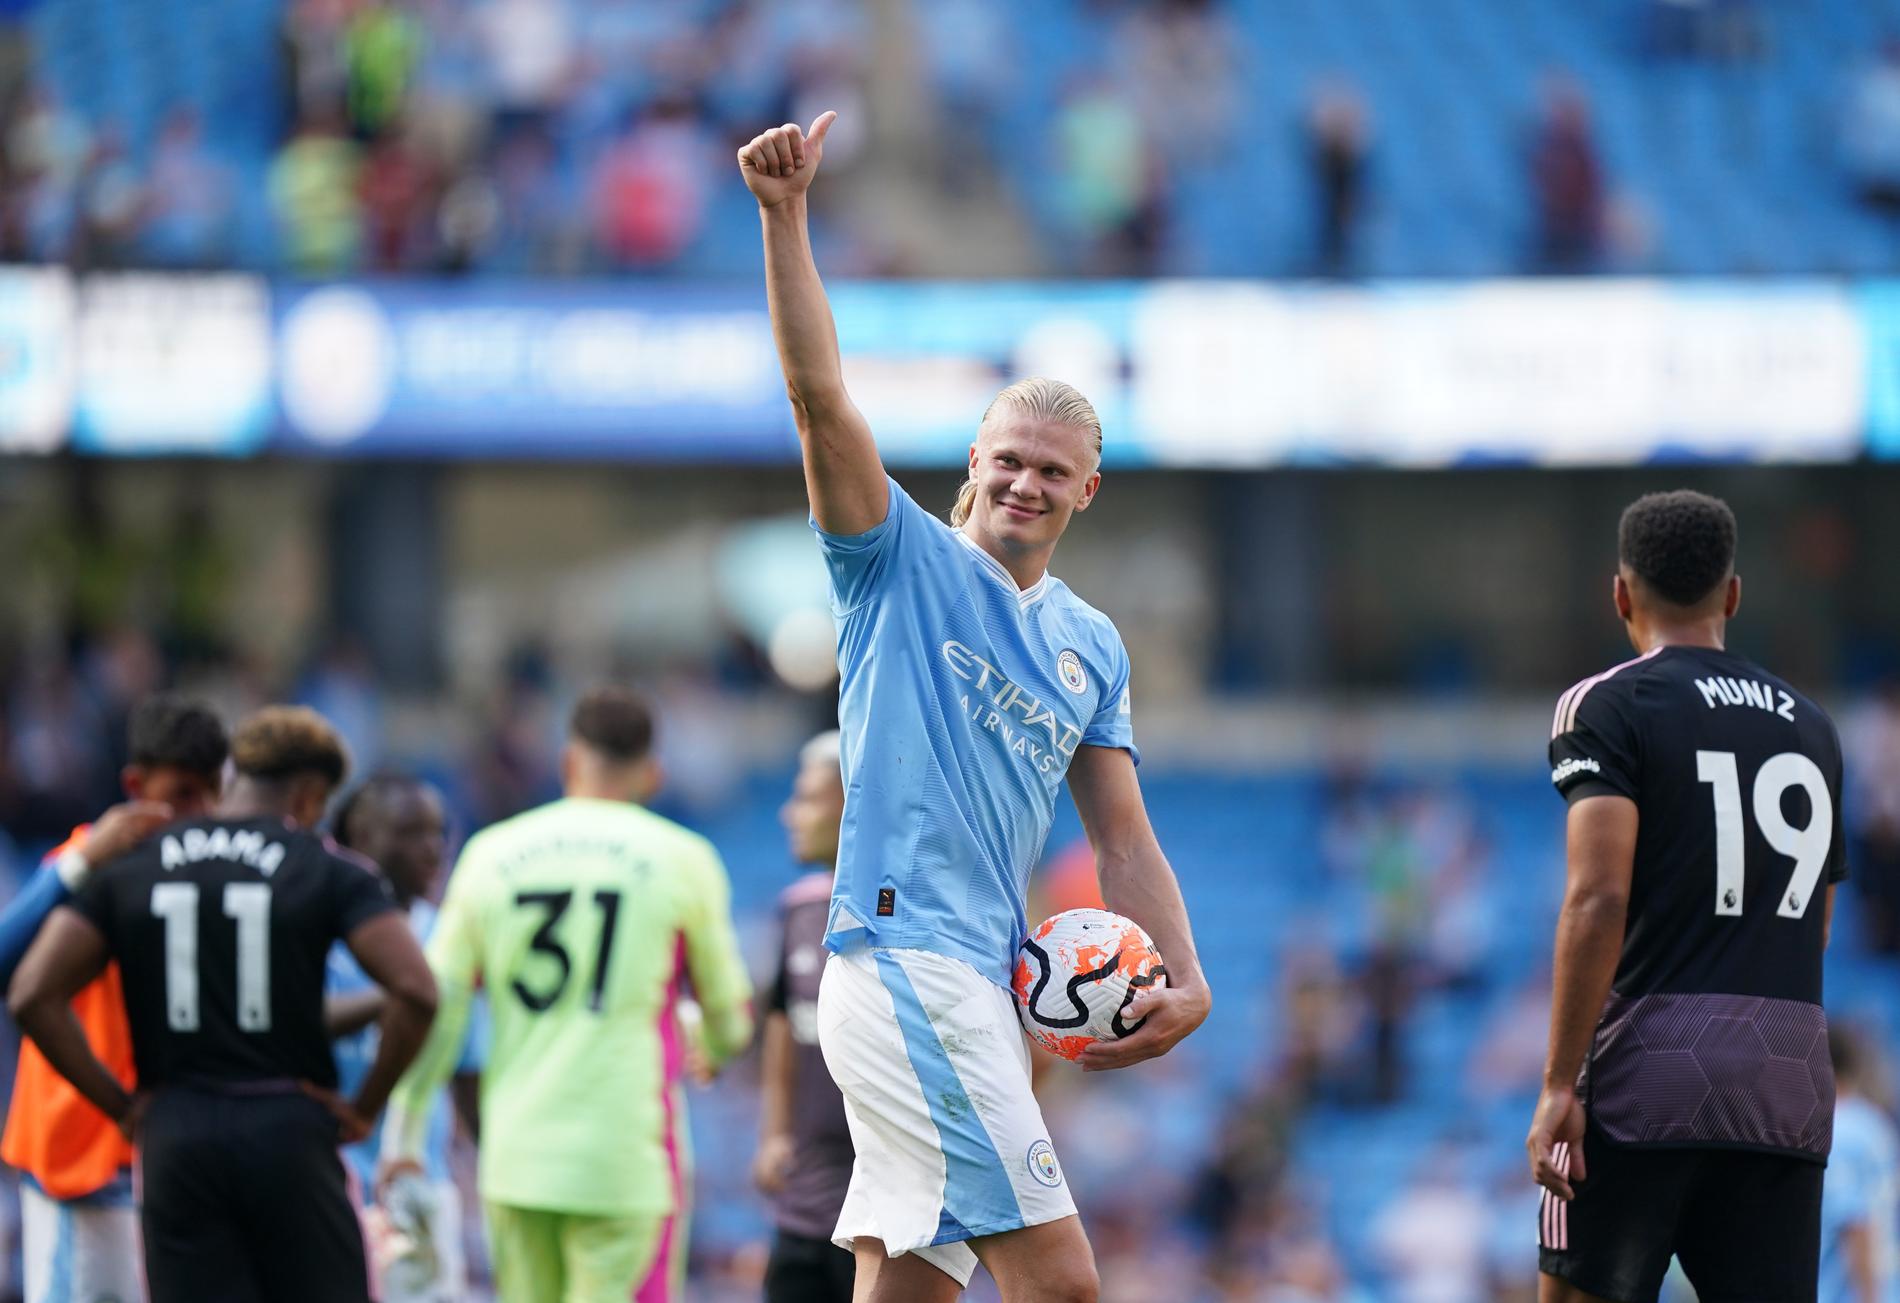 EXCLUSIVE: It costs NOK 749 per month to watch Erling Braut Haaland on Viaplay as he plays for Manchester City and other Premier League football teams.